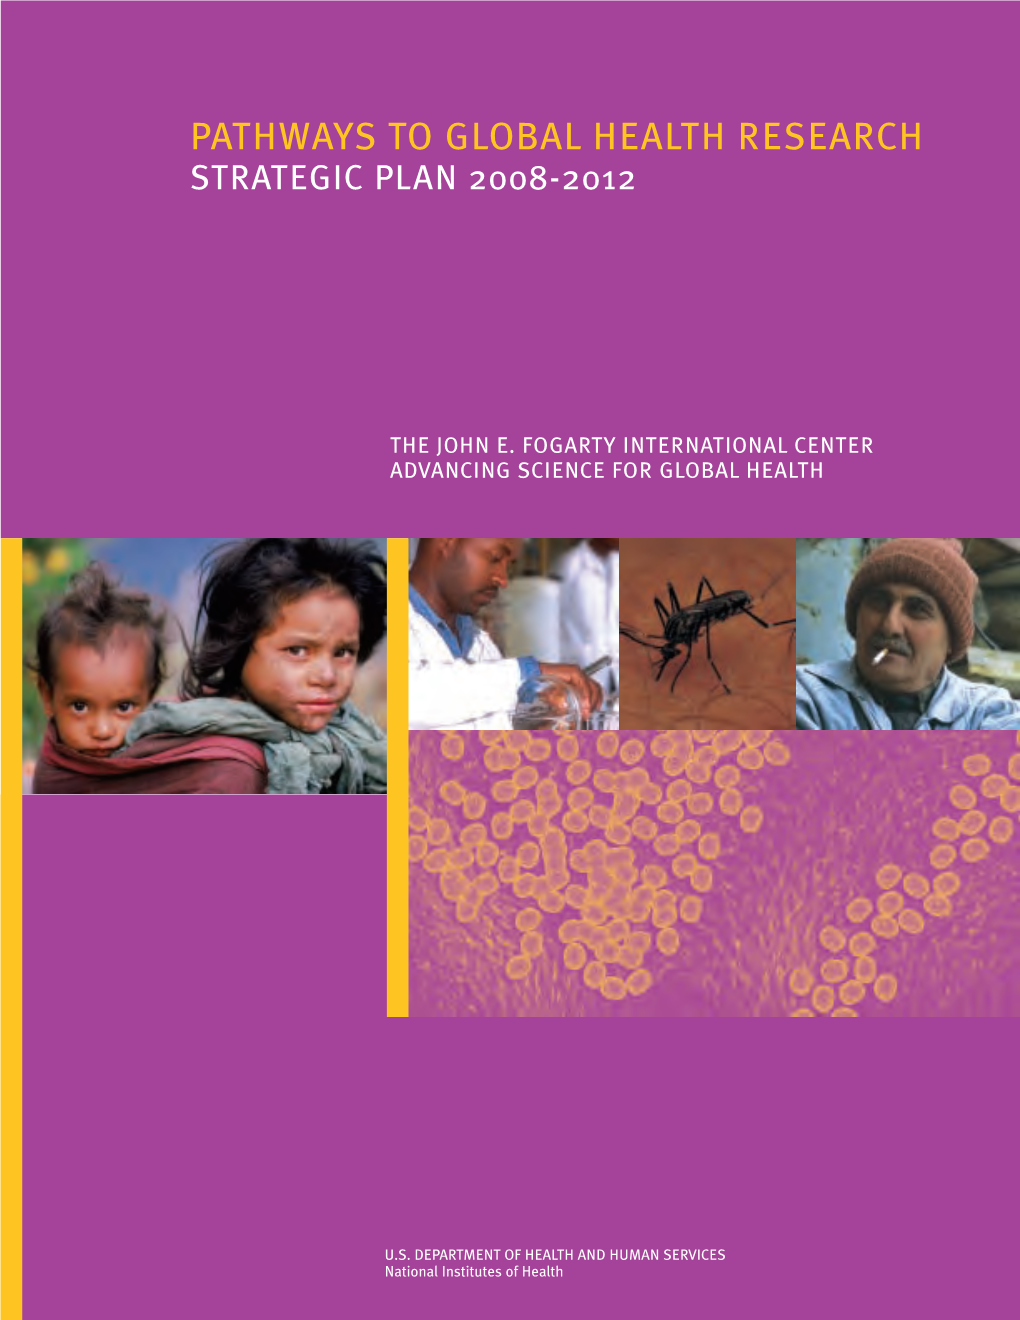 Fogarty Strategic Plan 2008-2012: Pathways to Global Health Research